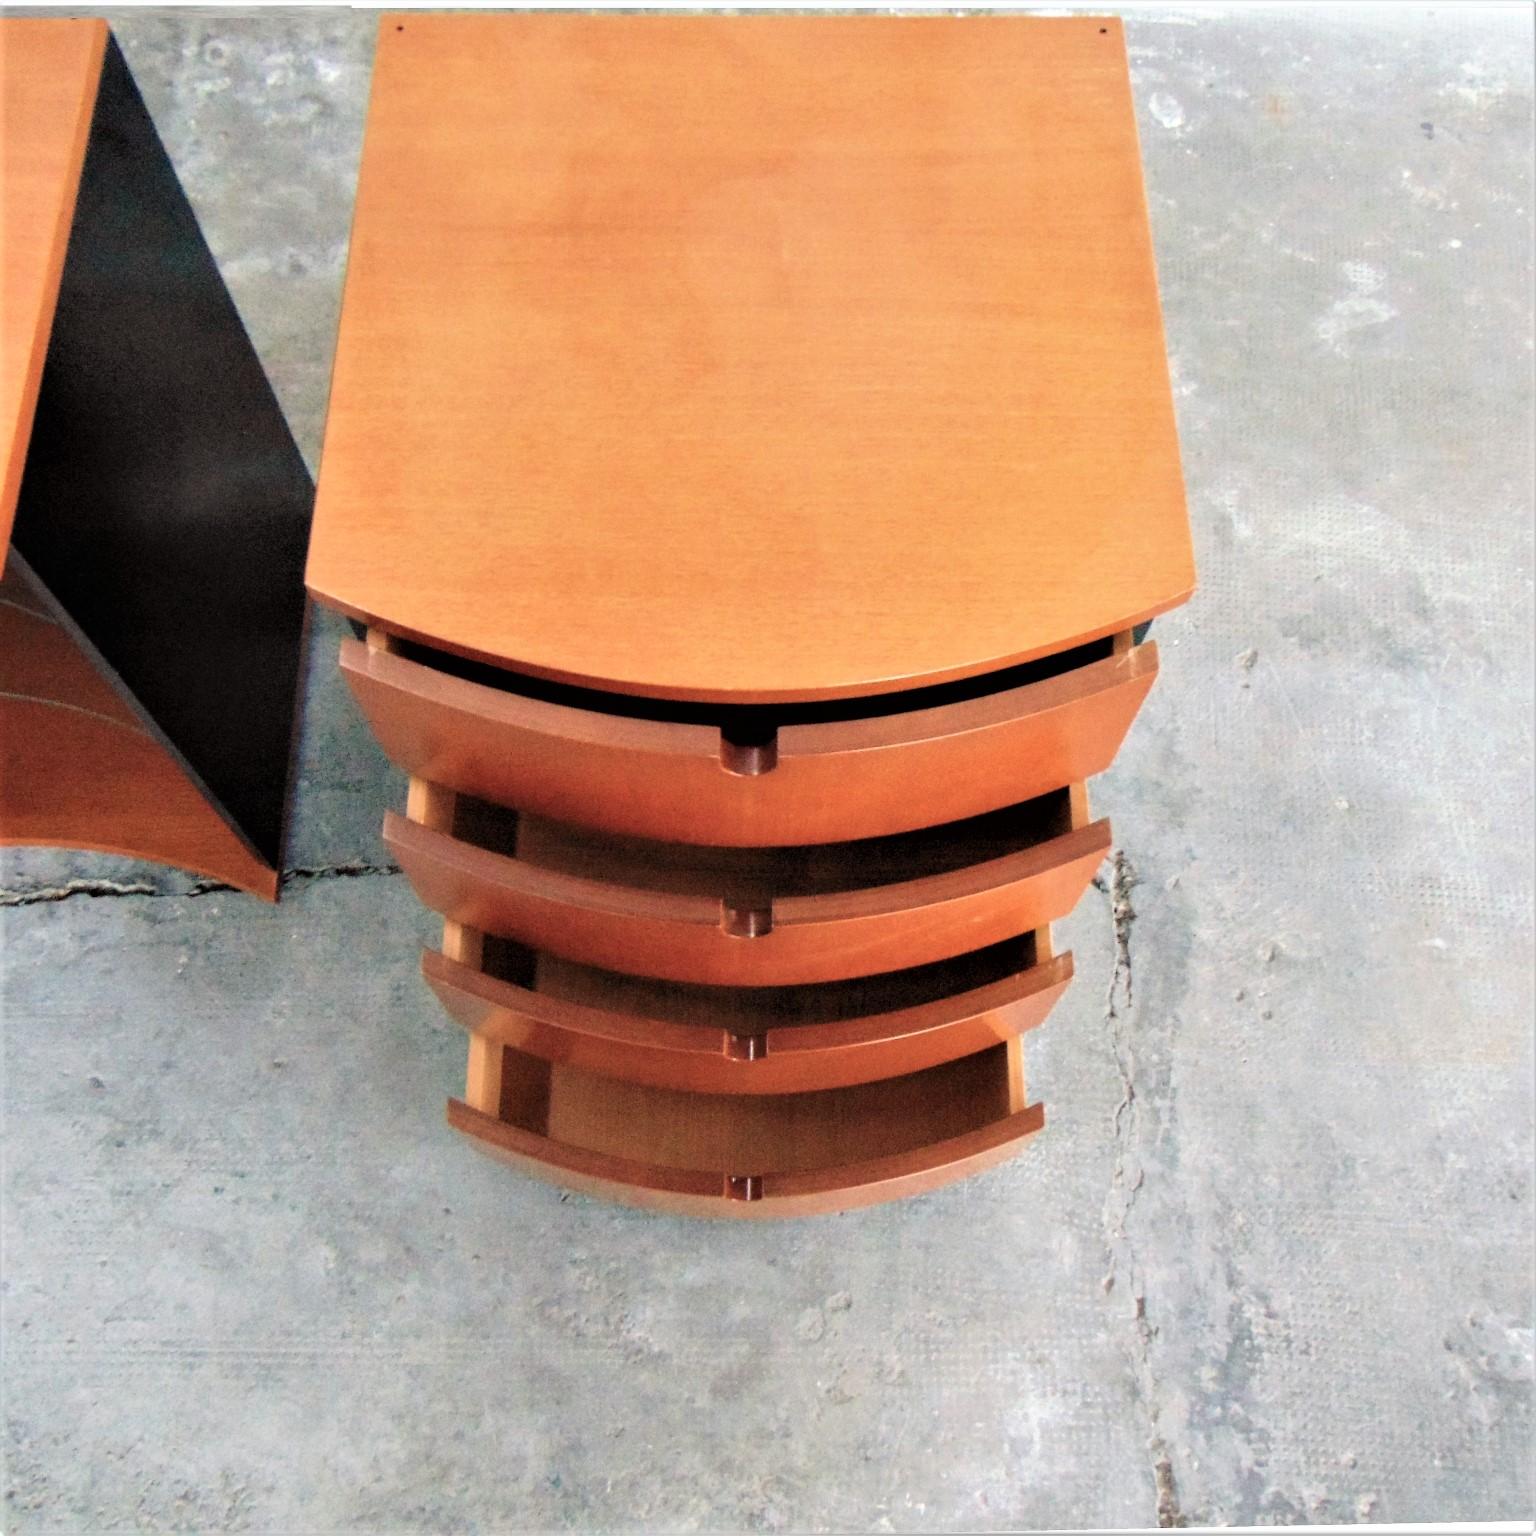 1990s Set of 2 Nightstands Walnut Stained Cherry and Black Lacquer, Roche Bobois In Good Condition For Sale In Arosio, IT